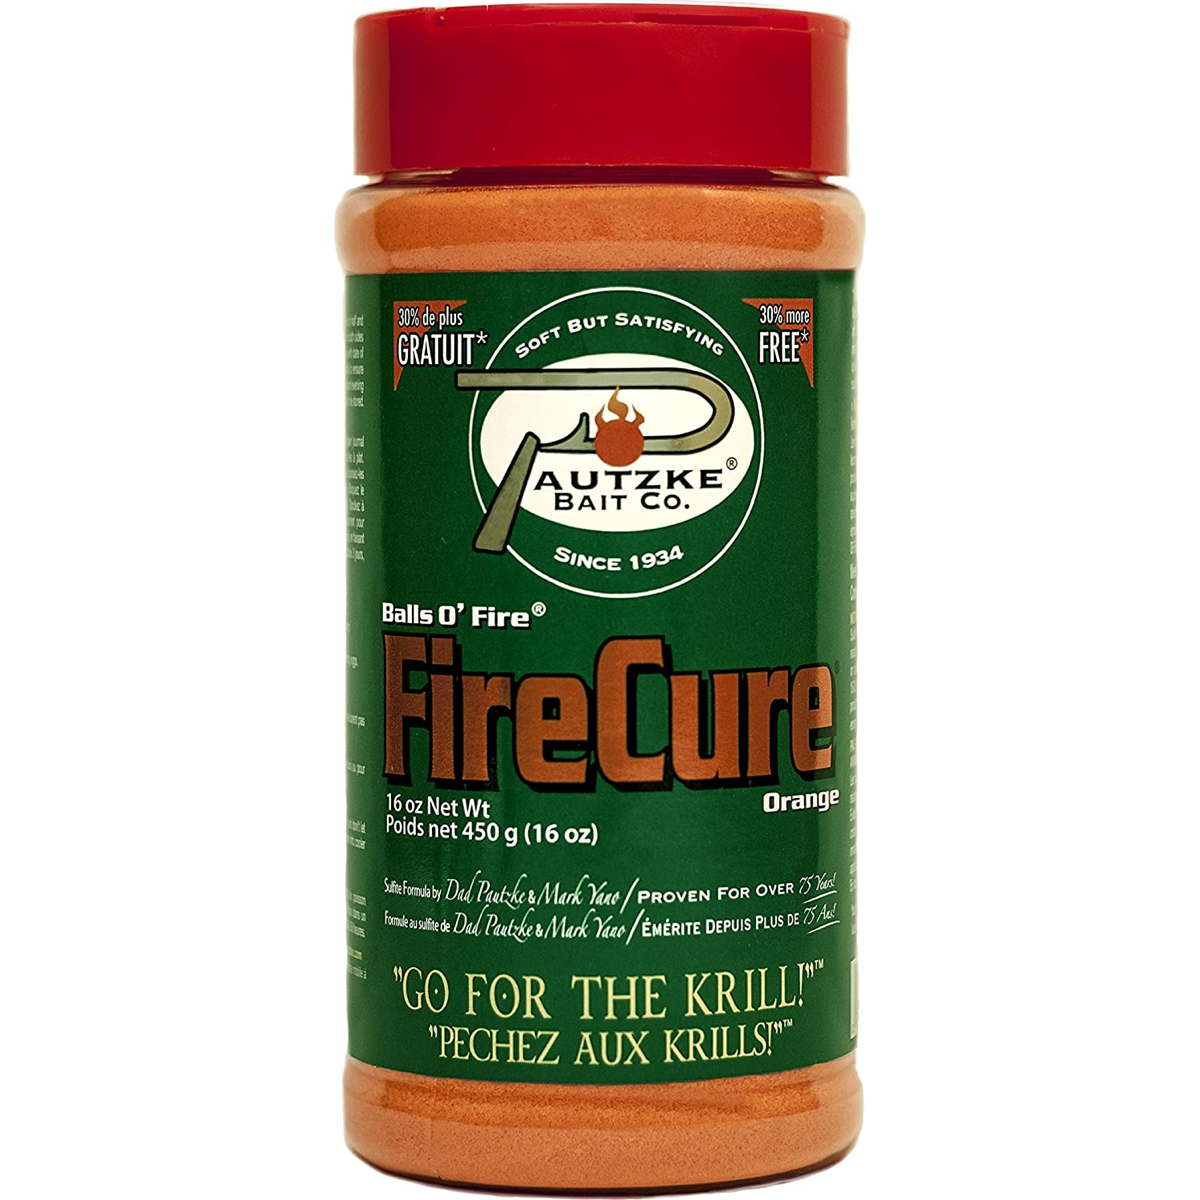 Photo of Pautzke Bait Company Fire Cure for sale at United Tackle Shops.